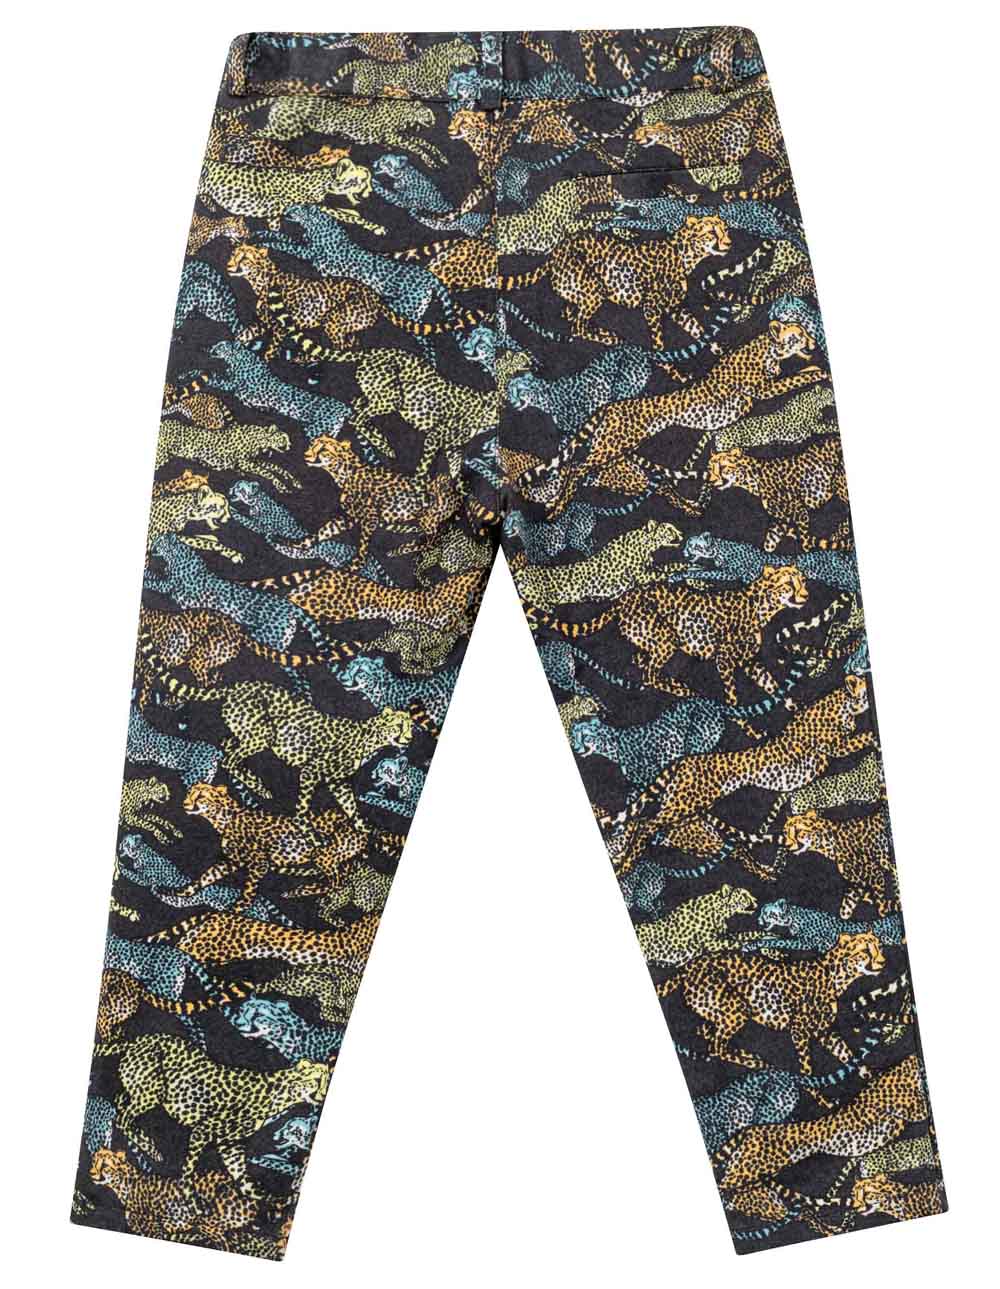 Printed-Trousers-100319510GRN-Image-2